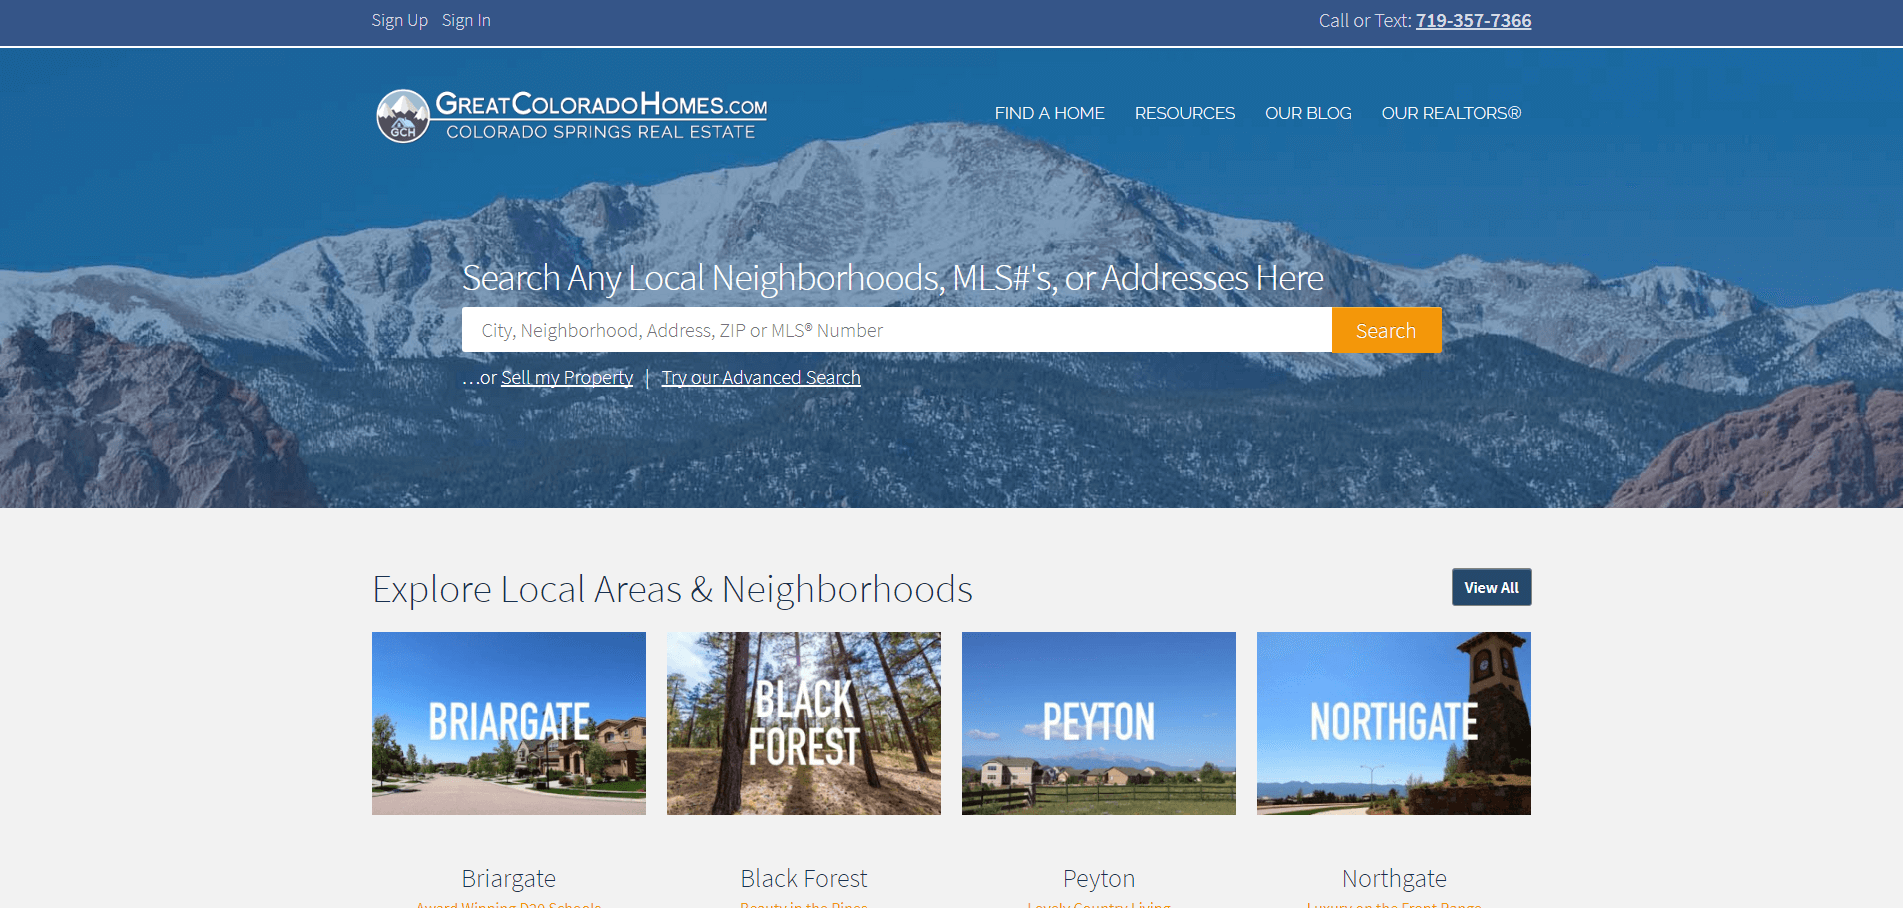  Awesome!  Looking for the best real estate websites? Here are 101 of them.  We reviewed each site and ranked them 1-101.  Here's greatcoloradohomes.com.  Guess who made #1! 